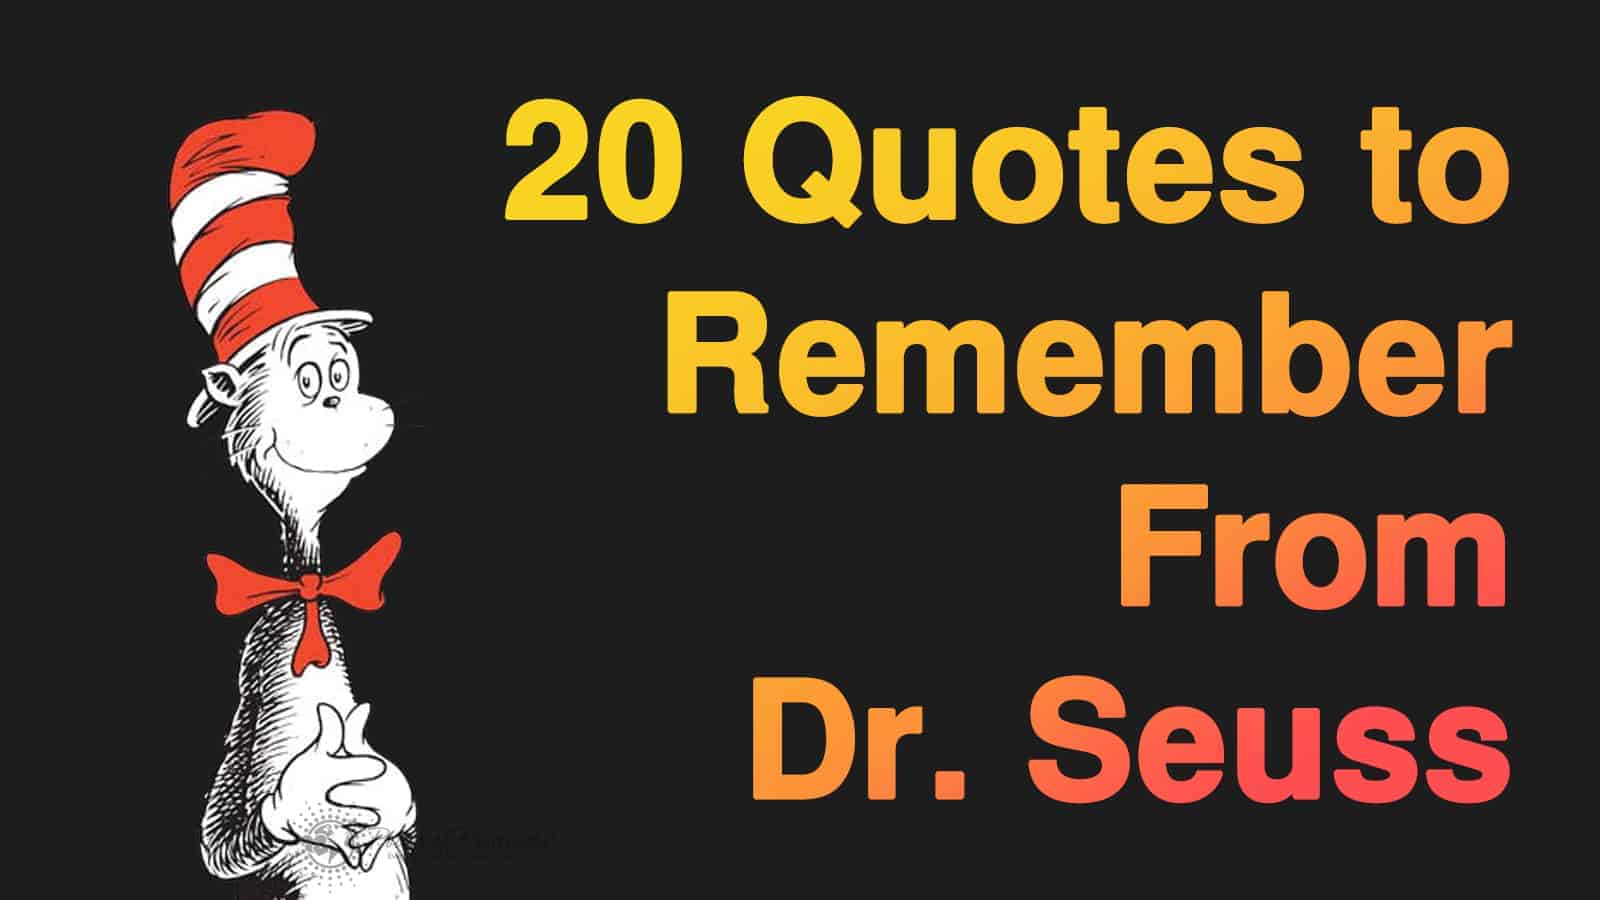 20 Quotes to Remember From Dr. Seuss